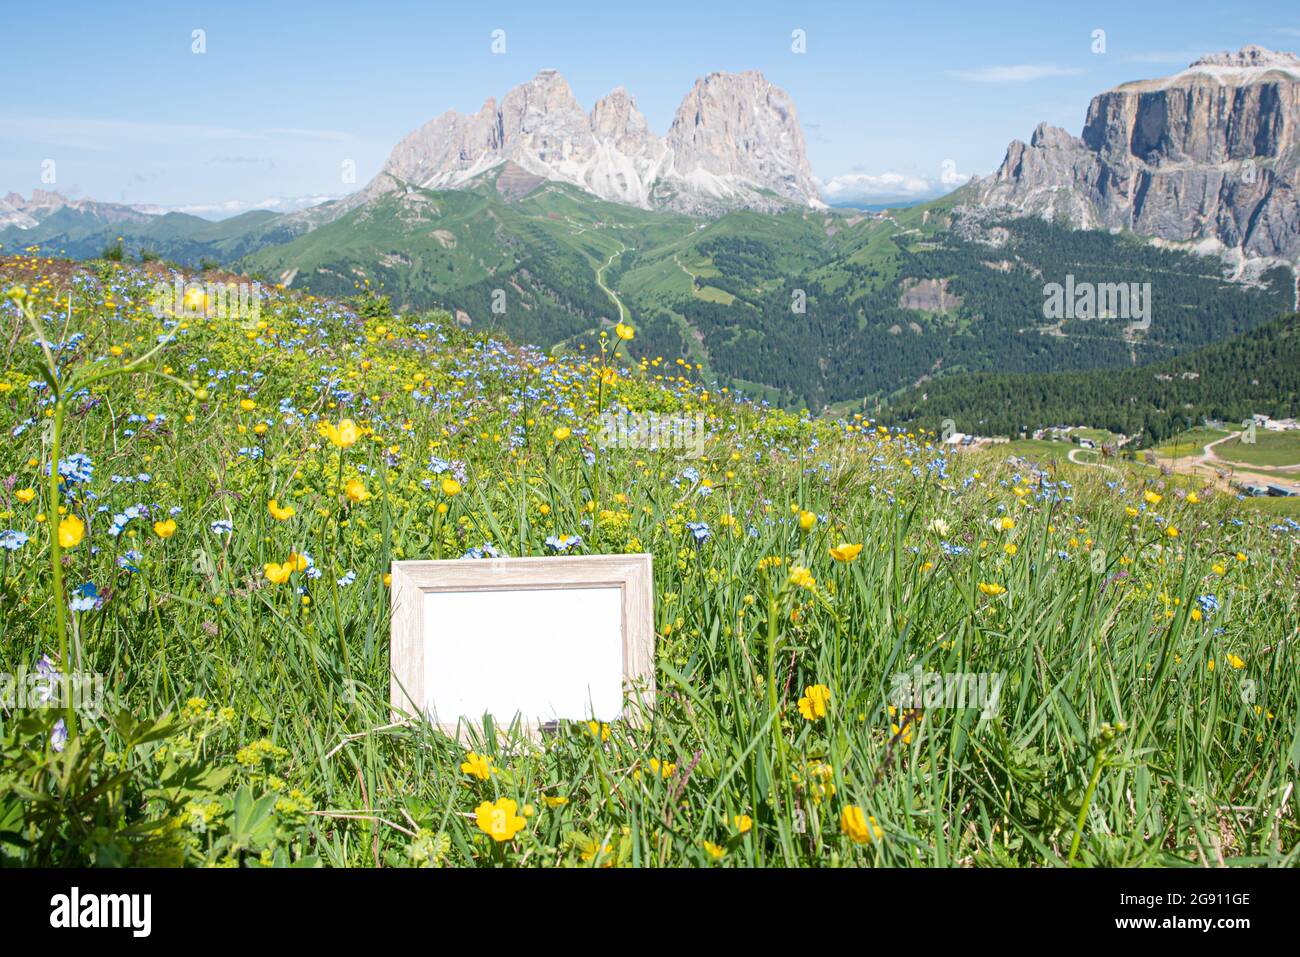 Empty wooden picture frame mockup in sunlight. Mountain in summer with grass and flowers in the foreground, majestic Alps mountains in the background. Stock Photo